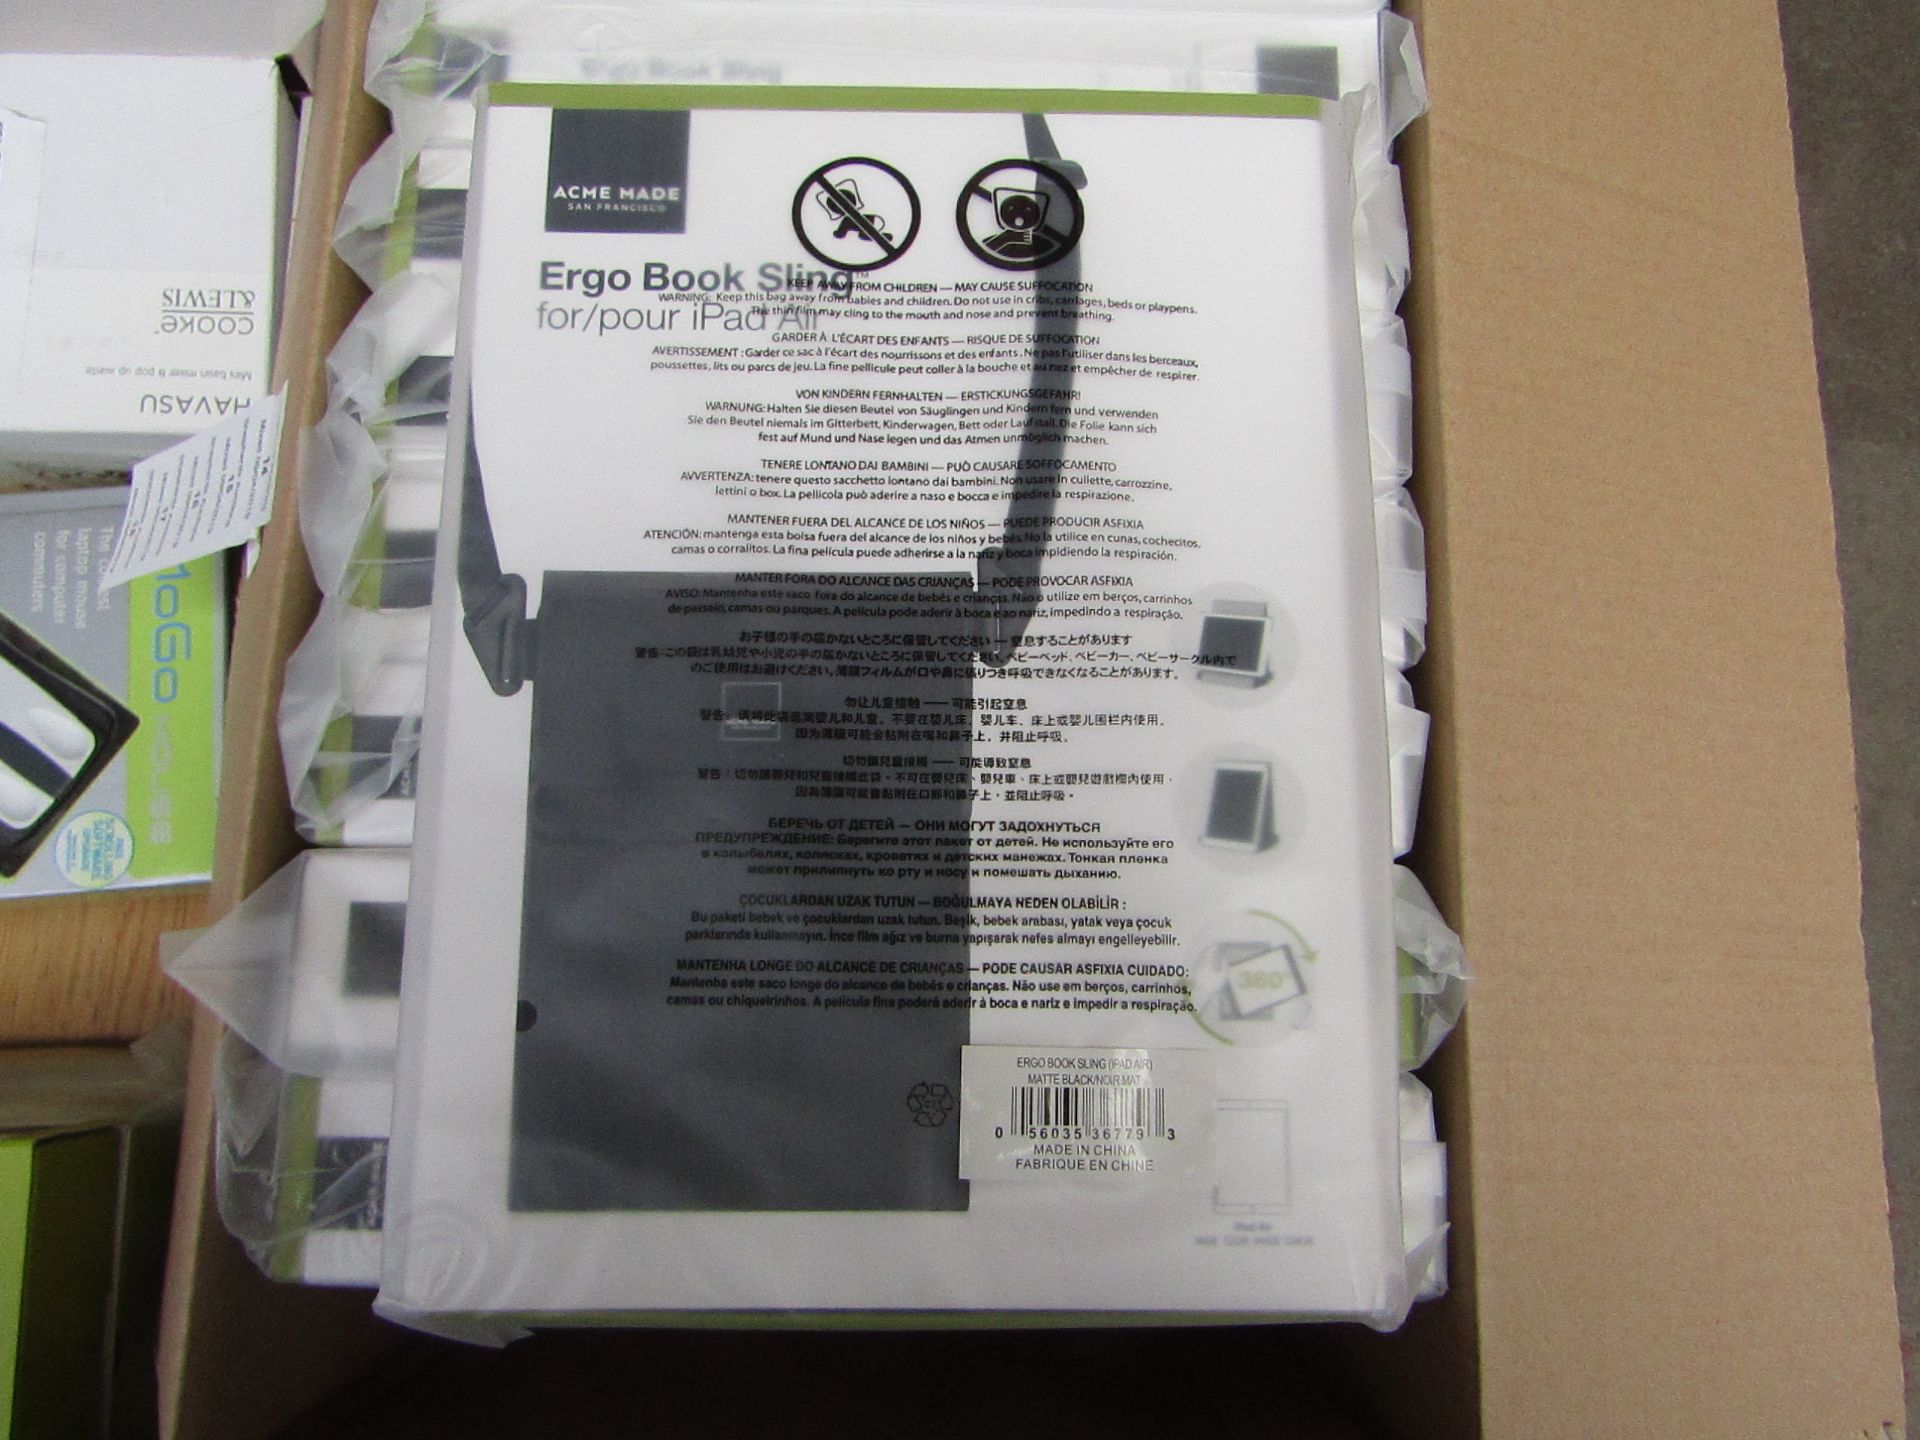 Acme Made Ergo Book Sling for iPad Air, new and boxed, RRP £24.99